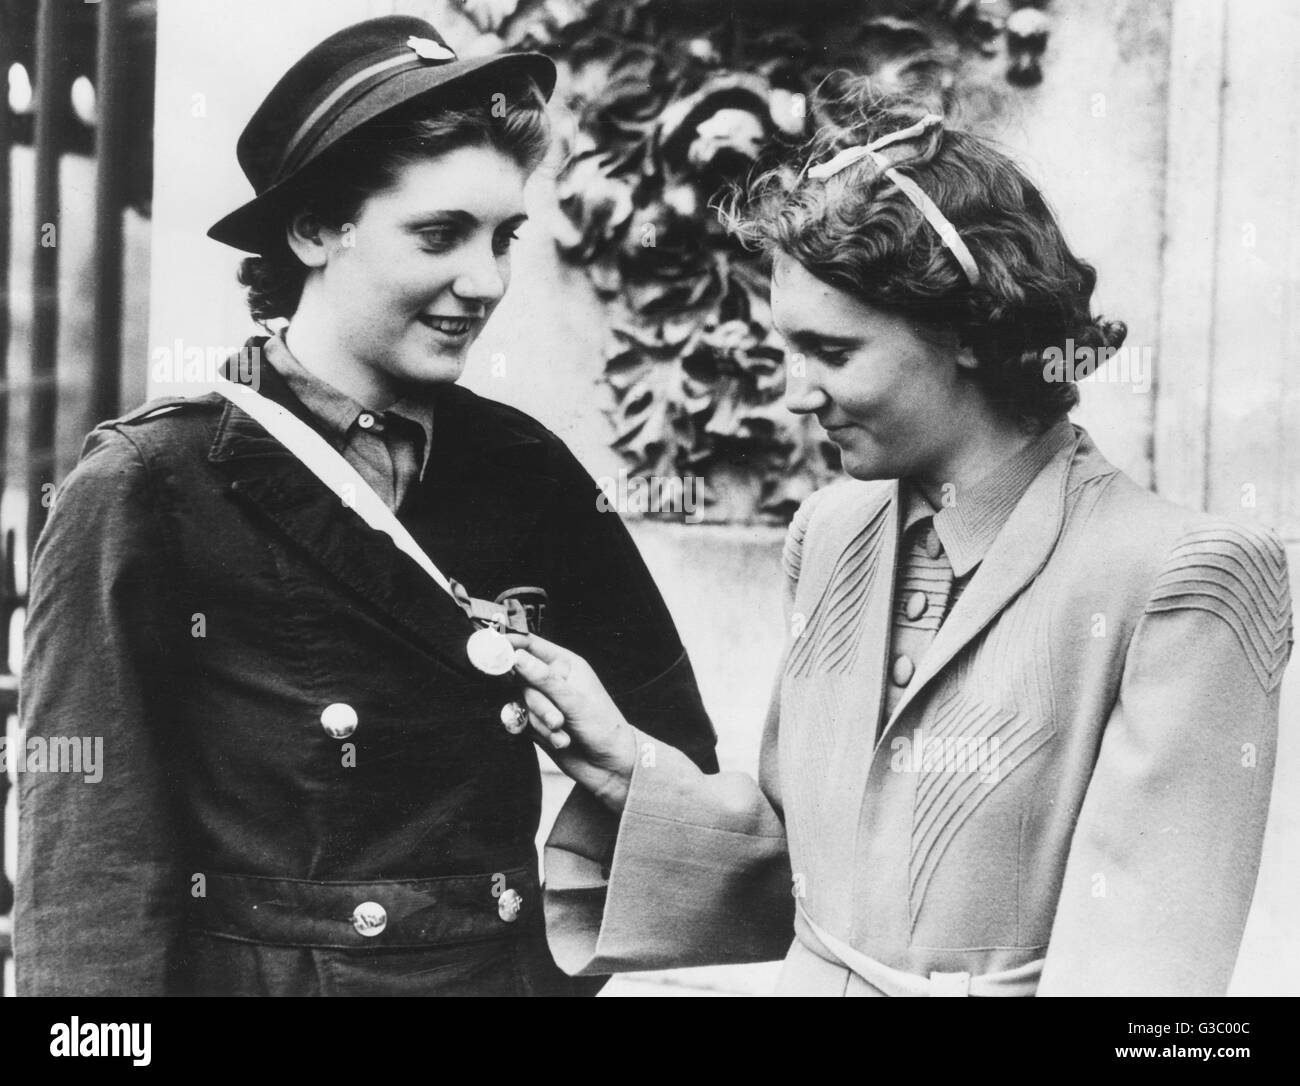 Betty Quinn - Coventry ARP Worker, has her George Medal admired by her sister, Joyce. Betty was the youngest recipient of the GM when they were presented for the first time at a recent Buckingham Palace investiture. Betty was recognised for her courageous Stock Photo